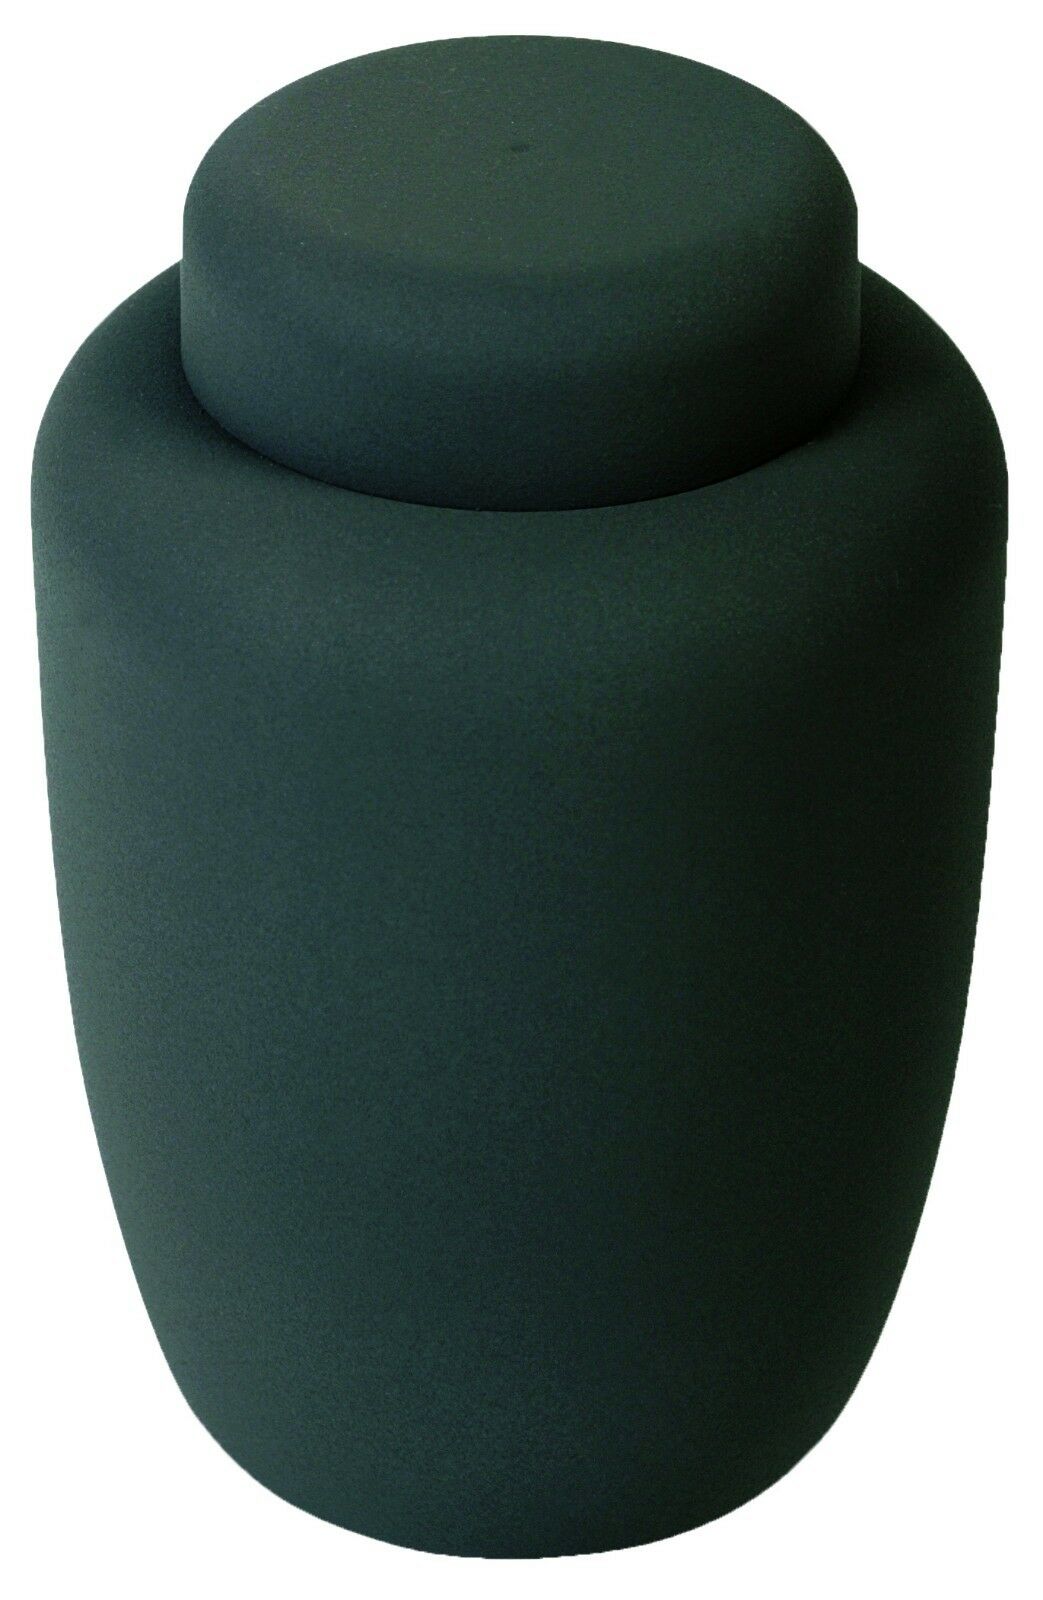 Black Cornstarch 238 Cubic Inches Large/Adult Funeral Cremation Urn for Ashes